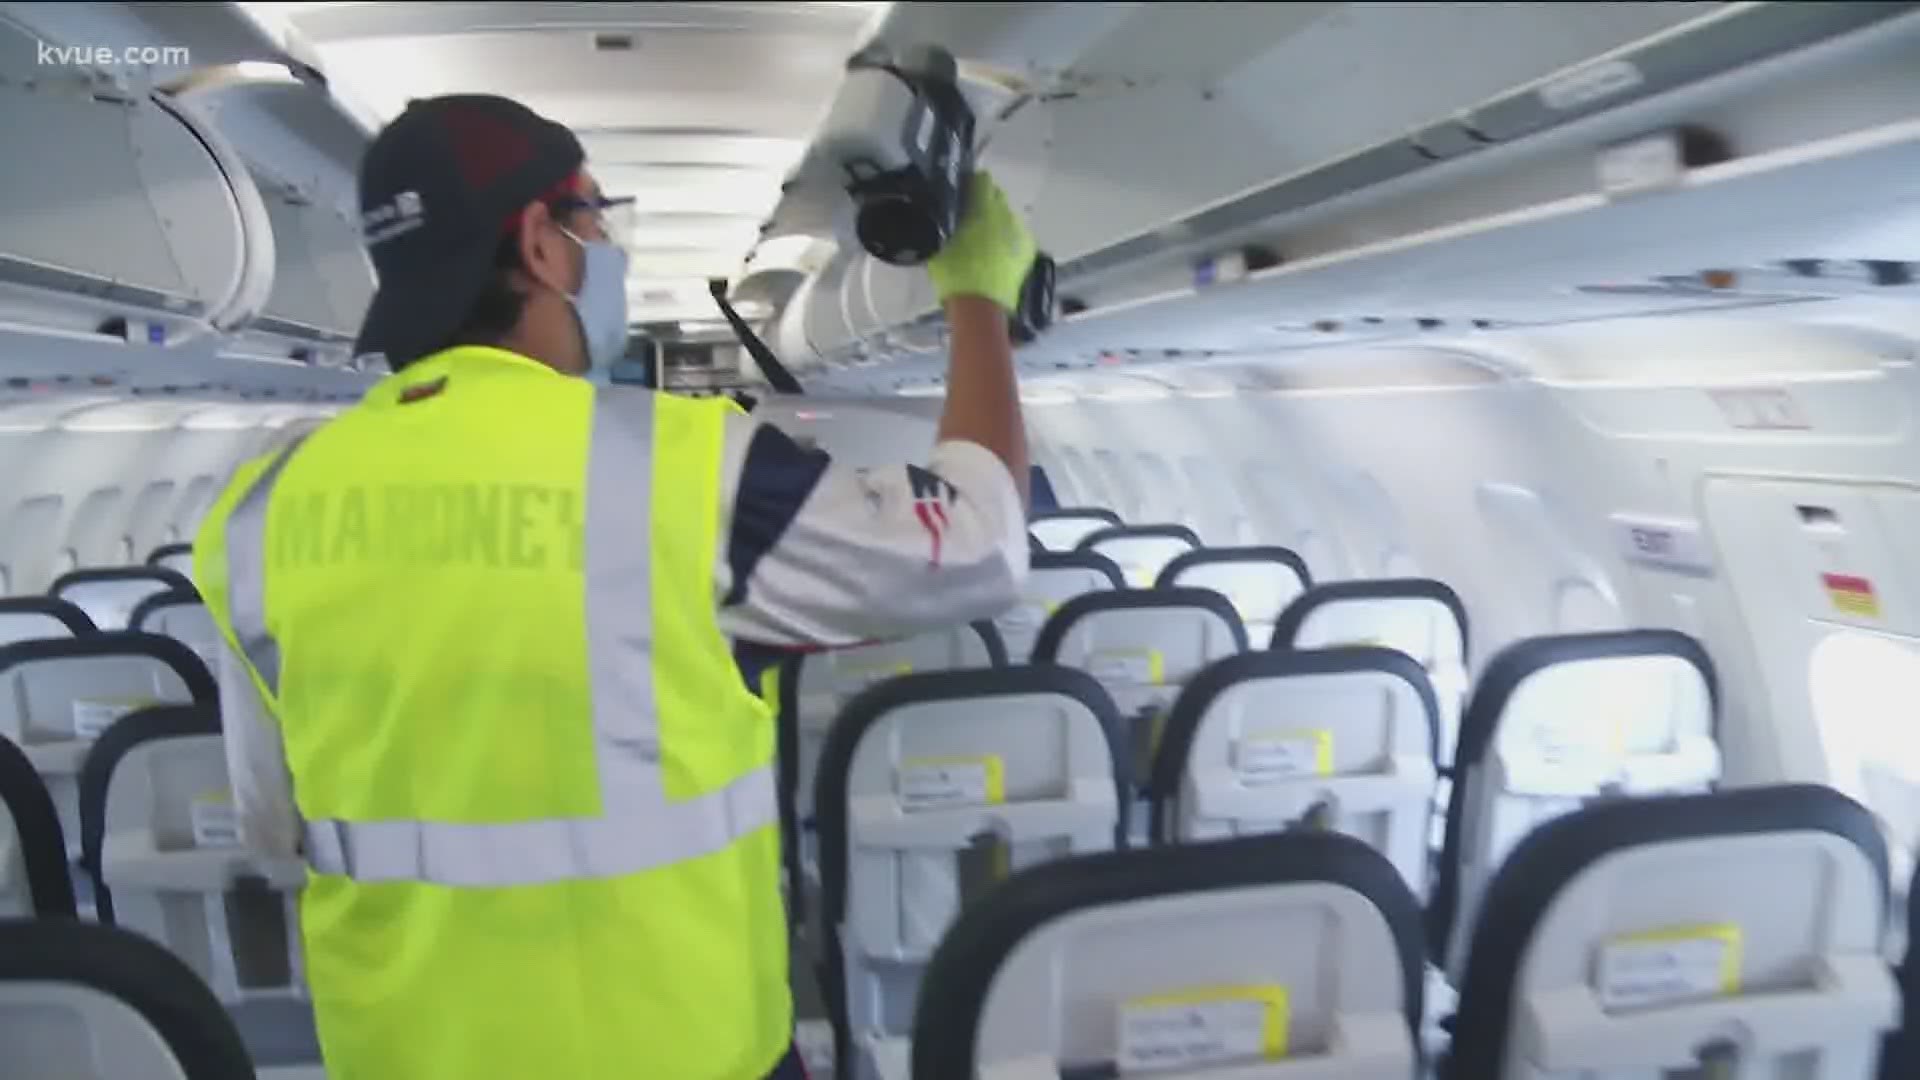 COVID-19 has kept a lot of people from flying the friendly skies. Bryce Newberry shows us what one airline is doing to keep passengers and crews healthy.